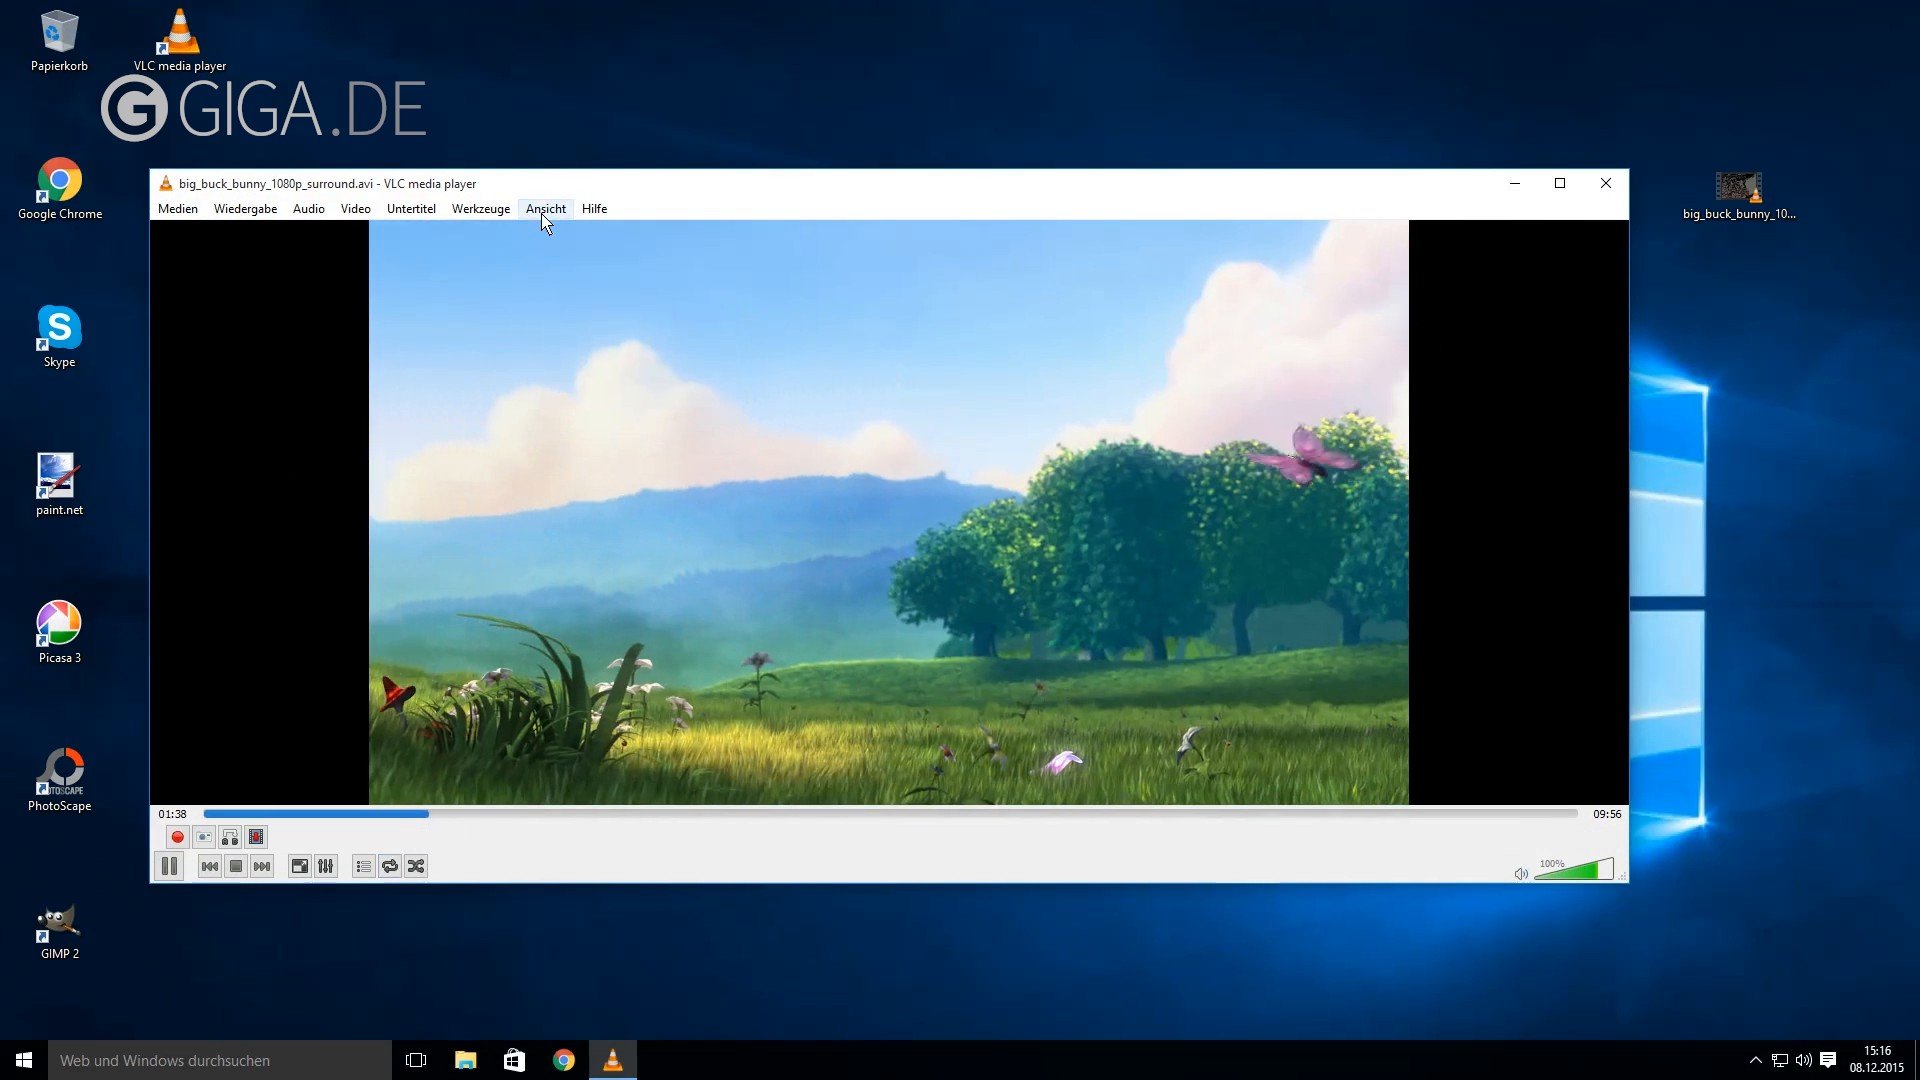 vlc movie player for windows 10